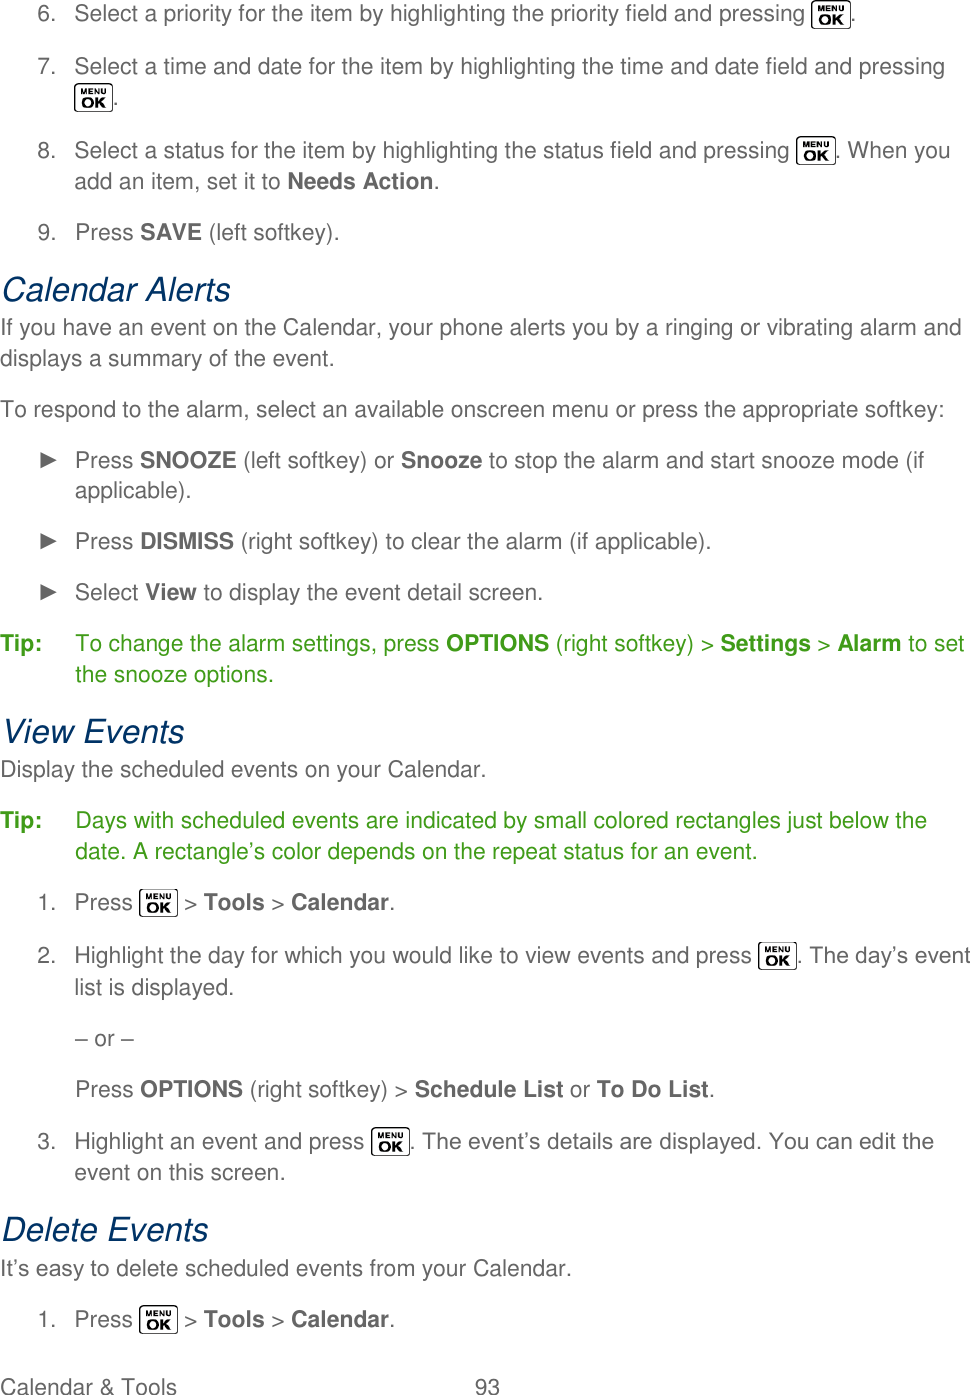  Calendar &amp; Tools  93   6.  Select a priority for the item by highlighting the priority field and pressing  . 7.  Select a time and date for the item by highlighting the time and date field and pressing . 8.  Select a status for the item by highlighting the status field and pressing  . When you add an item, set it to Needs Action. 9.  Press SAVE (left softkey). Calendar Alerts If you have an event on the Calendar, your phone alerts you by a ringing or vibrating alarm and displays a summary of the event. To respond to the alarm, select an available onscreen menu or press the appropriate softkey: ►  Press SNOOZE (left softkey) or Snooze to stop the alarm and start snooze mode (if applicable). ►  Press DISMISS (right softkey) to clear the alarm (if applicable). ►  Select View to display the event detail screen. Tip:  To change the alarm settings, press OPTIONS (right softkey) &gt; Settings &gt; Alarm to set the snooze options. View Events Display the scheduled events on your Calendar. Tip:  Days with scheduled events are indicated by small colored rectangles just below the date. A rectangle‘s color depends on the repeat status for an event. 1.  Press   &gt; Tools &gt; Calendar. 2.  Highlight the day for which you would like to view events and press  . The day‘s event list is displayed. – or – Press OPTIONS (right softkey) &gt; Schedule List or To Do List. 3.  Highlight an event and press  . The event‘s details are displayed. You can edit the event on this screen. Delete Events It‘s easy to delete scheduled events from your Calendar. 1.  Press   &gt; Tools &gt; Calendar. 